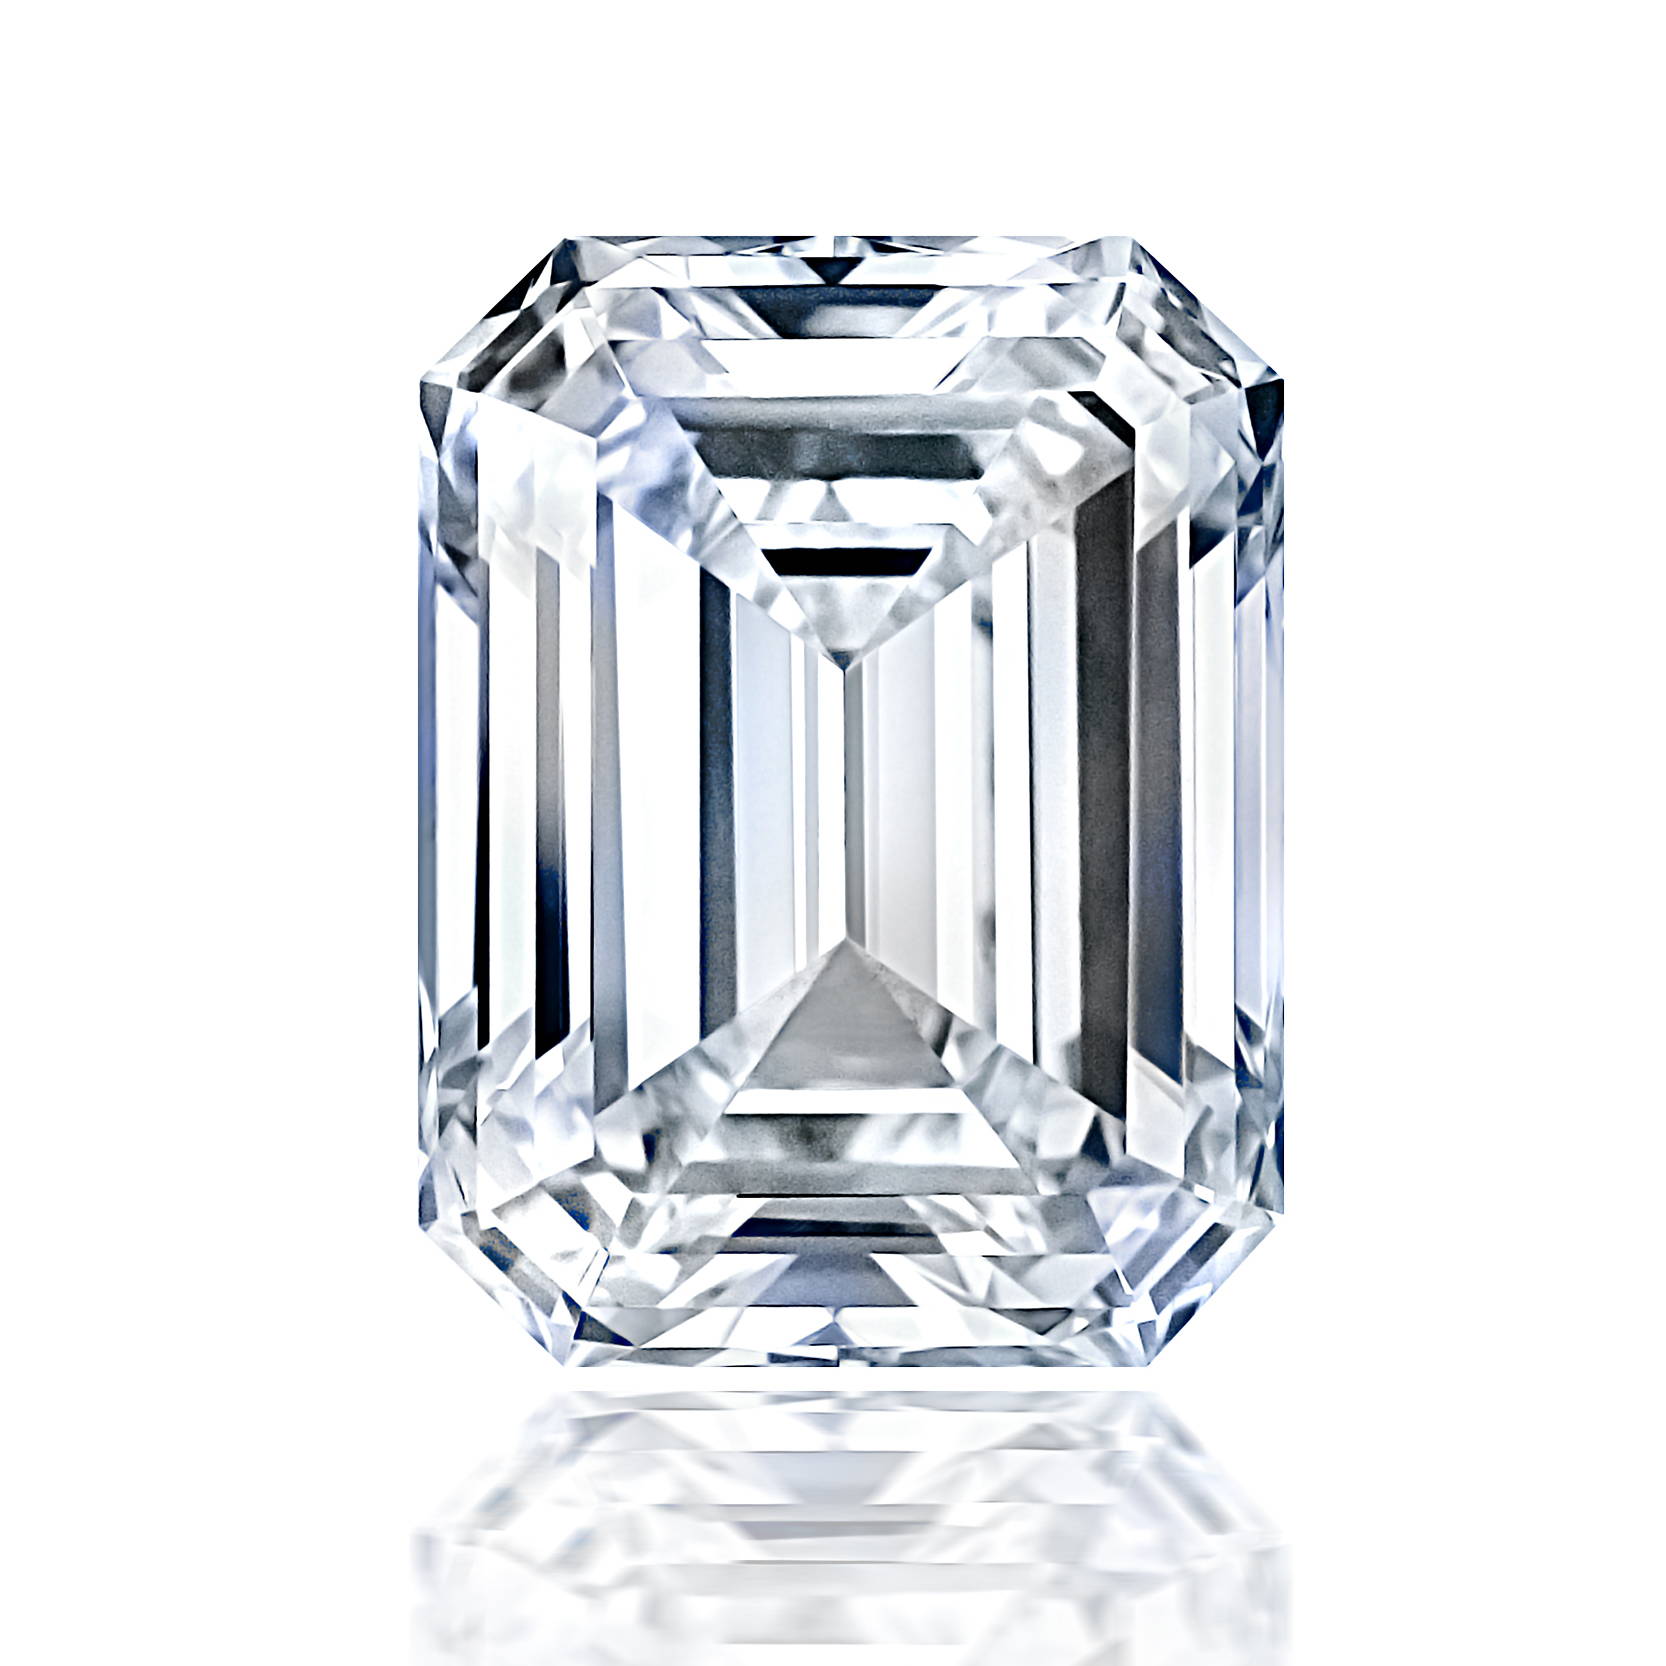 The Best Emerald-Cut Engagement Rings Share This One Quality – Ring ...